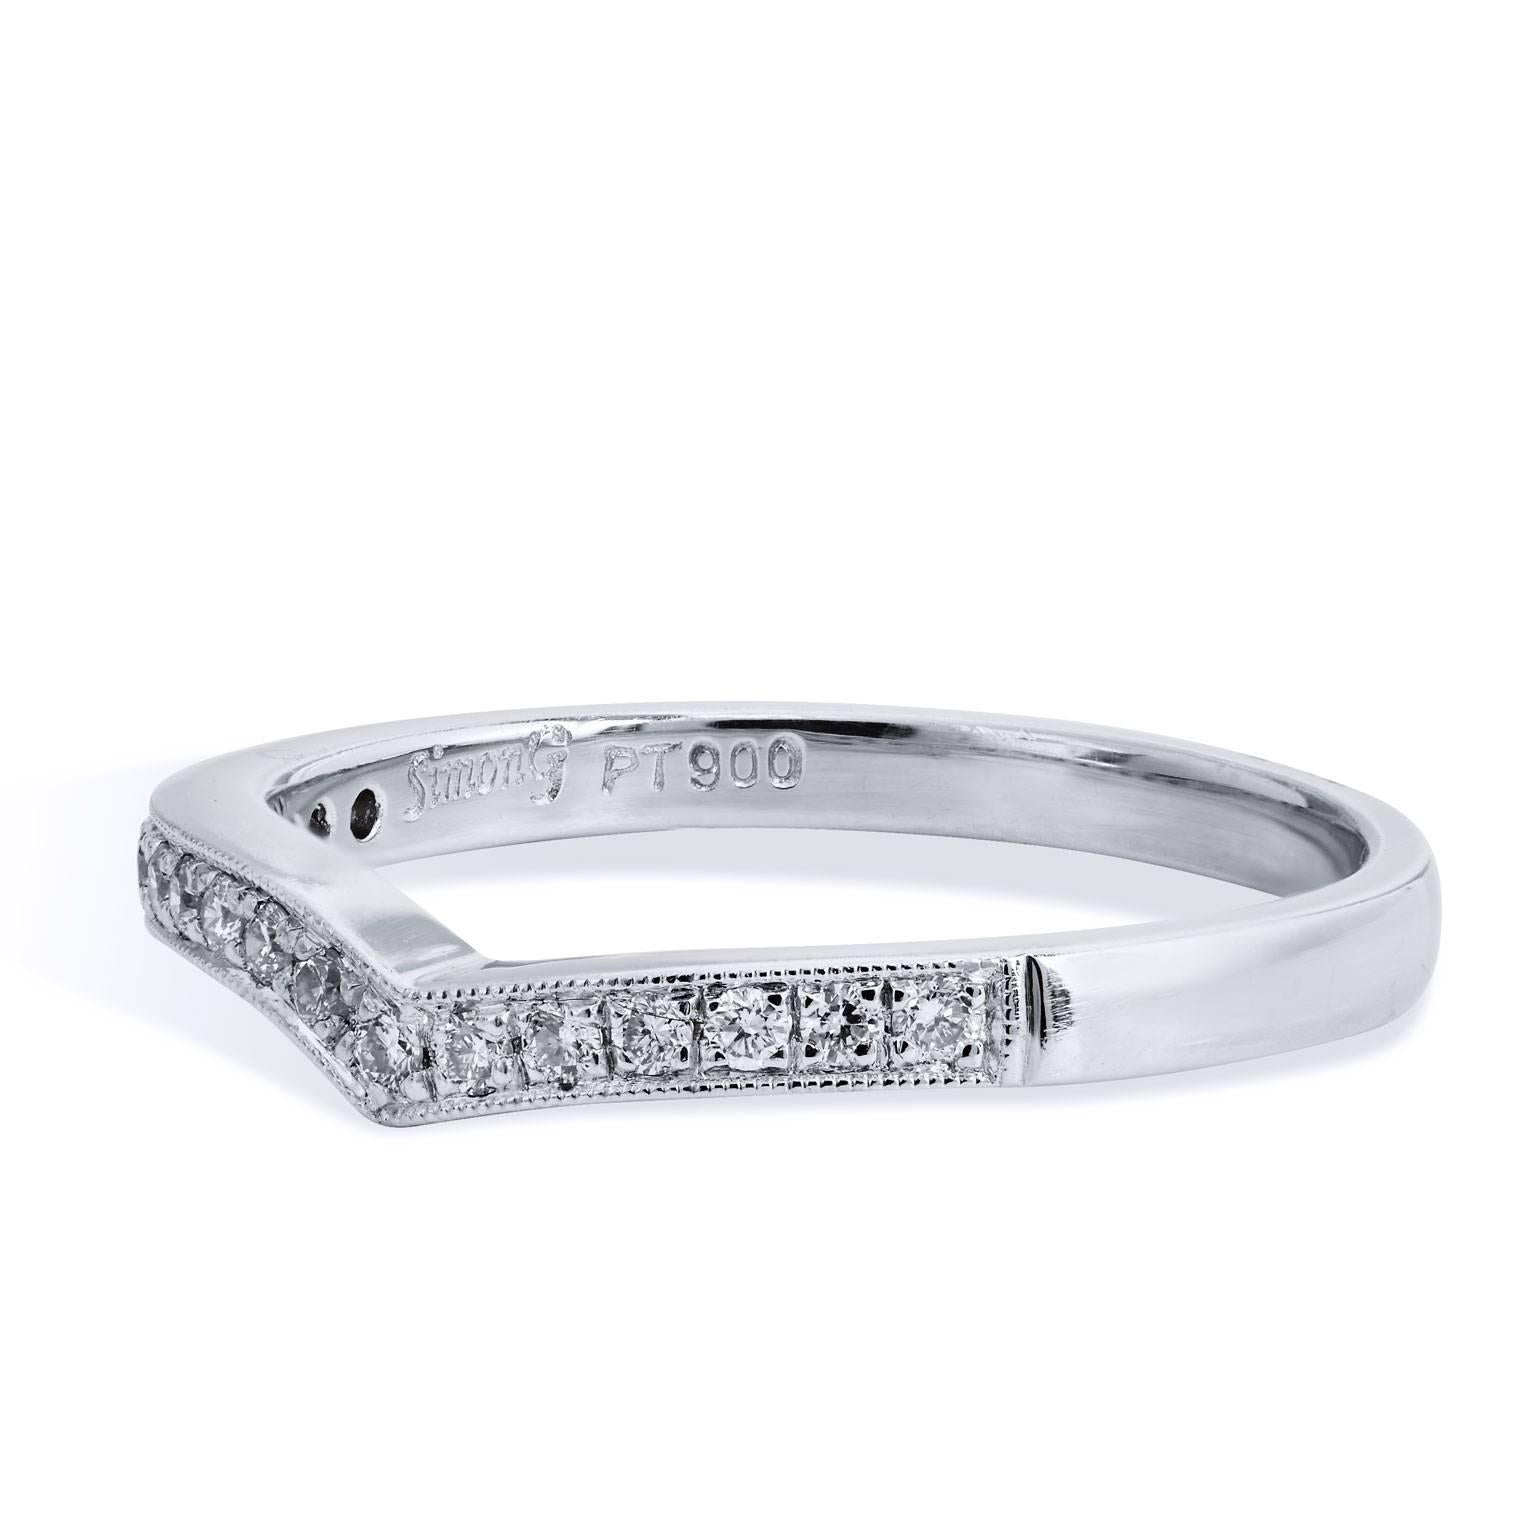 0.16 Carat Pave Diamond Free-Form Band Ring

Enjoy this previously loved wedding band fashioned in platinum with free form shank featuring 0.16 carat of pave-set diamond. 

(